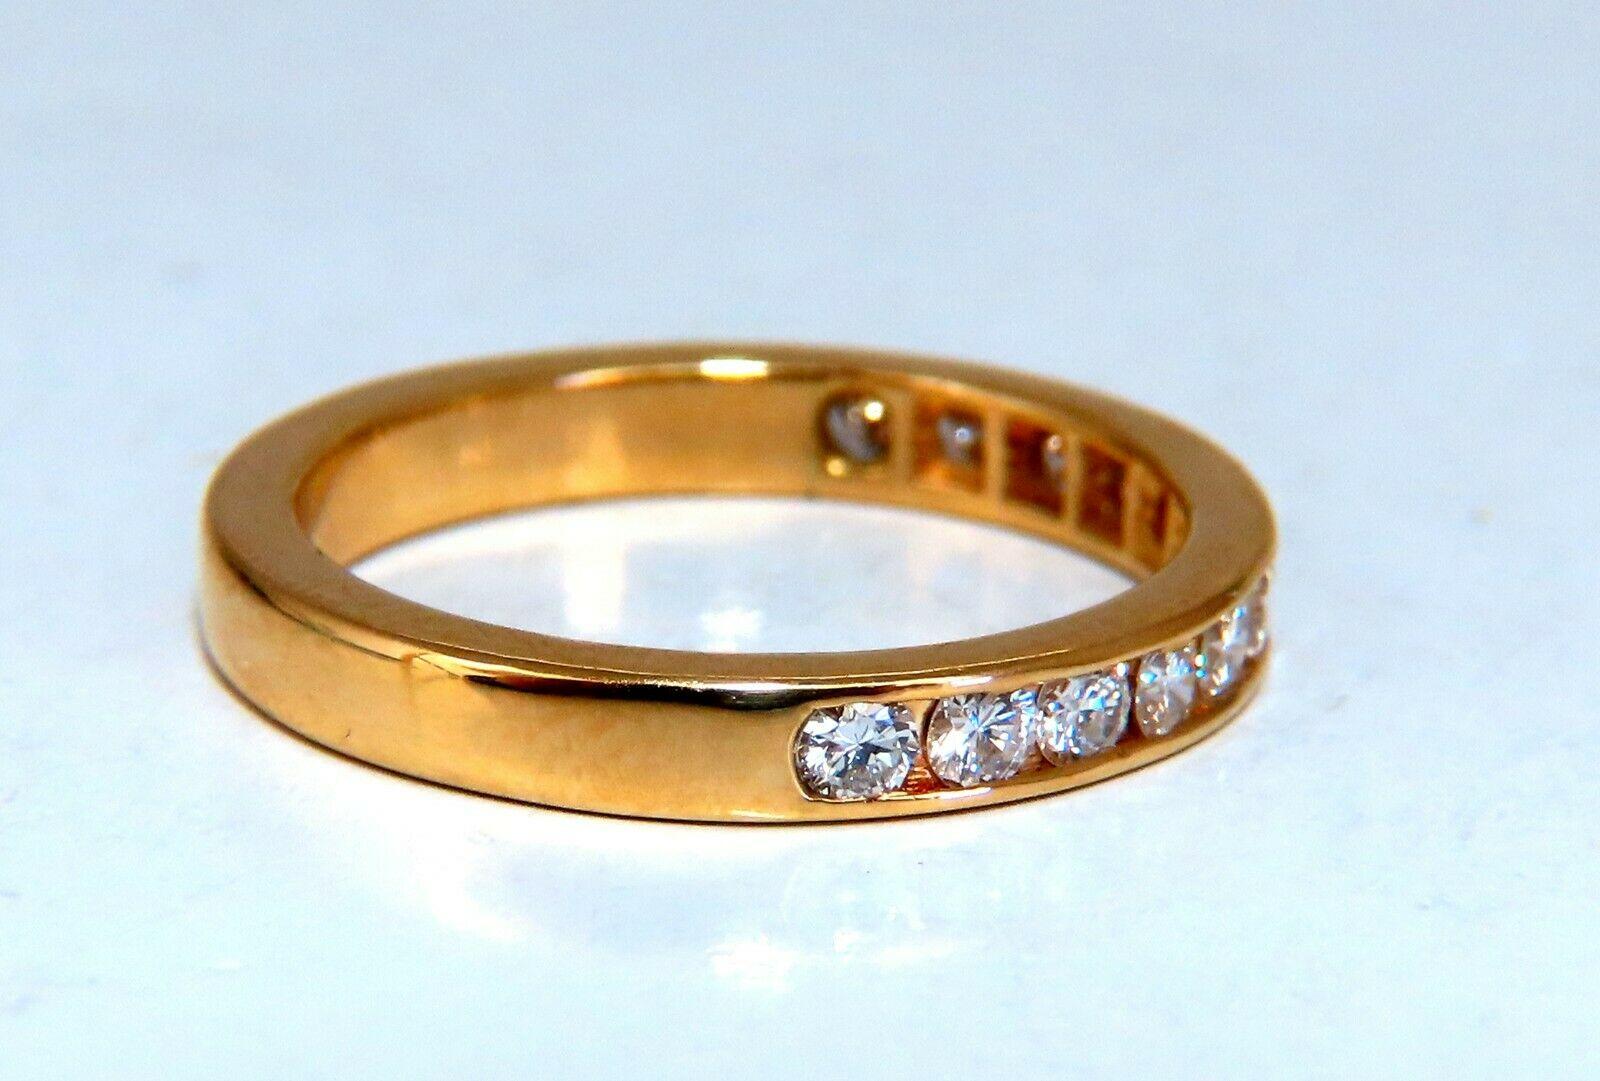 12 Band / Everyday Channel.

.54ct. Natural (12) round cut brilliant diamond

Channel Set ring.

Durable Built.

Vs-2 clarity  G/H color.

14kt yellow gold.

3.1 Grams

Overall ring: 2.8mm diameter

Depth: 1.7mm

Current ring size: 6.25

May